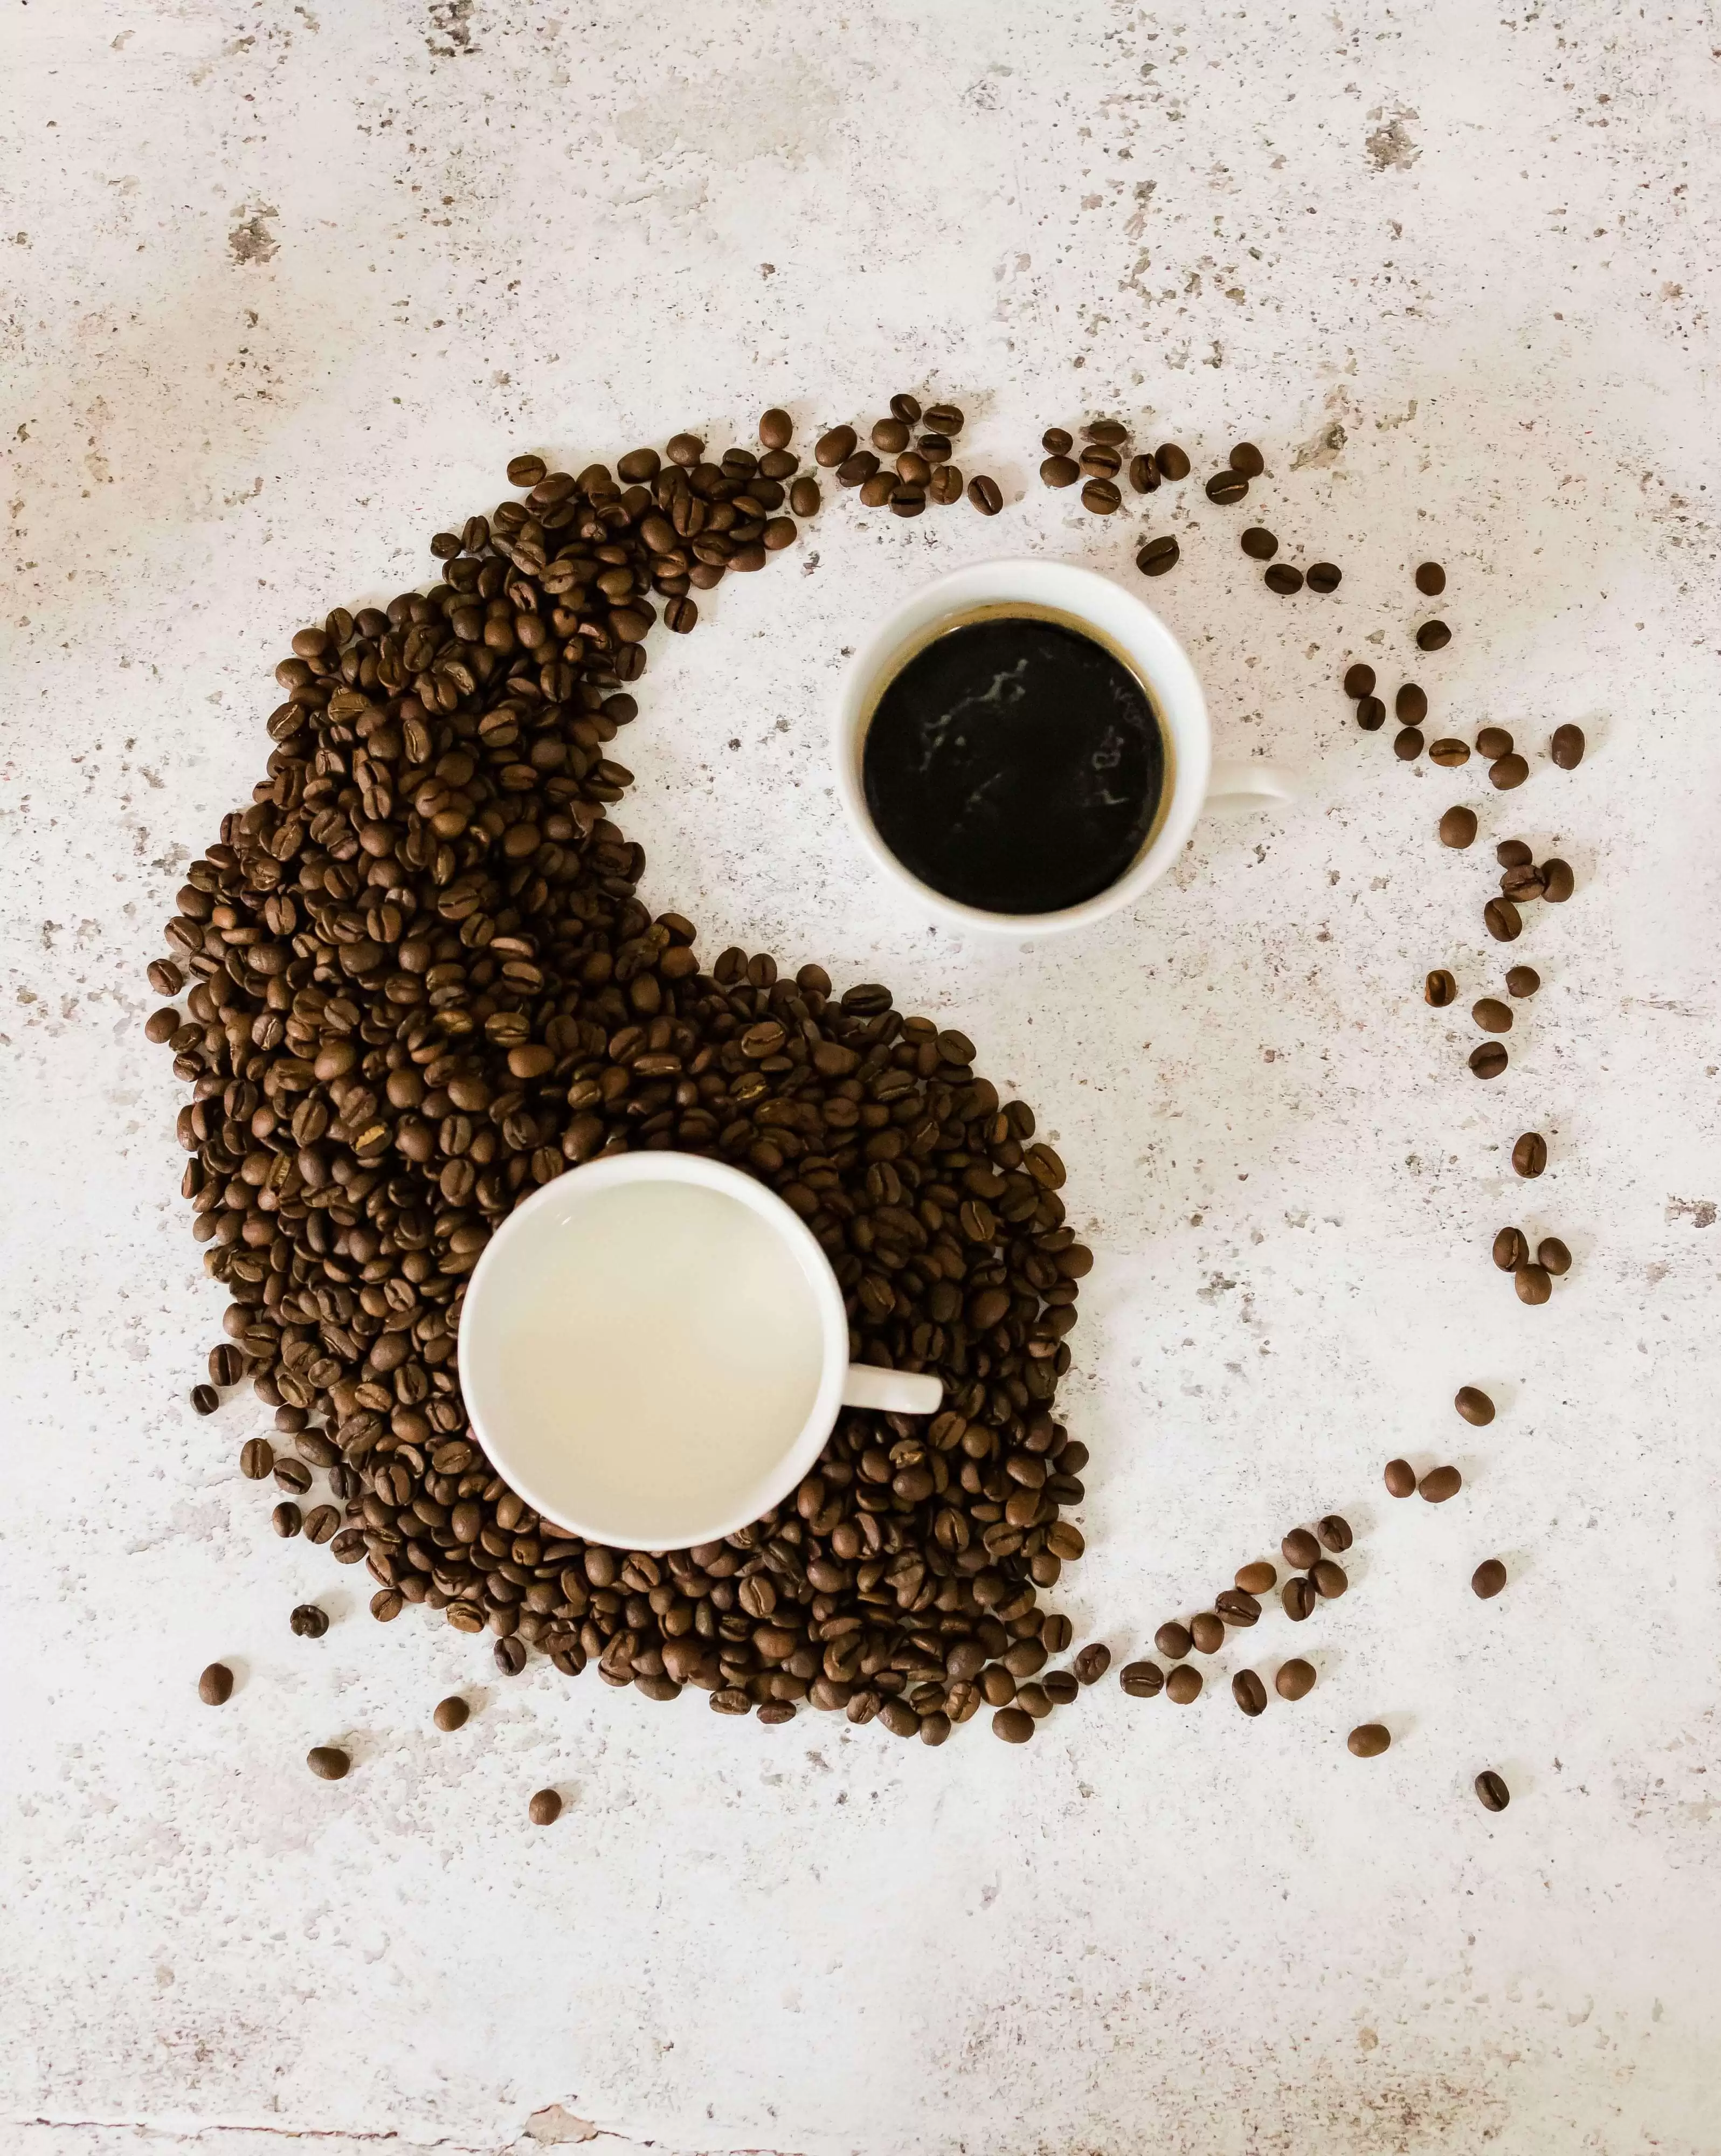 Ying and yang coffee beans